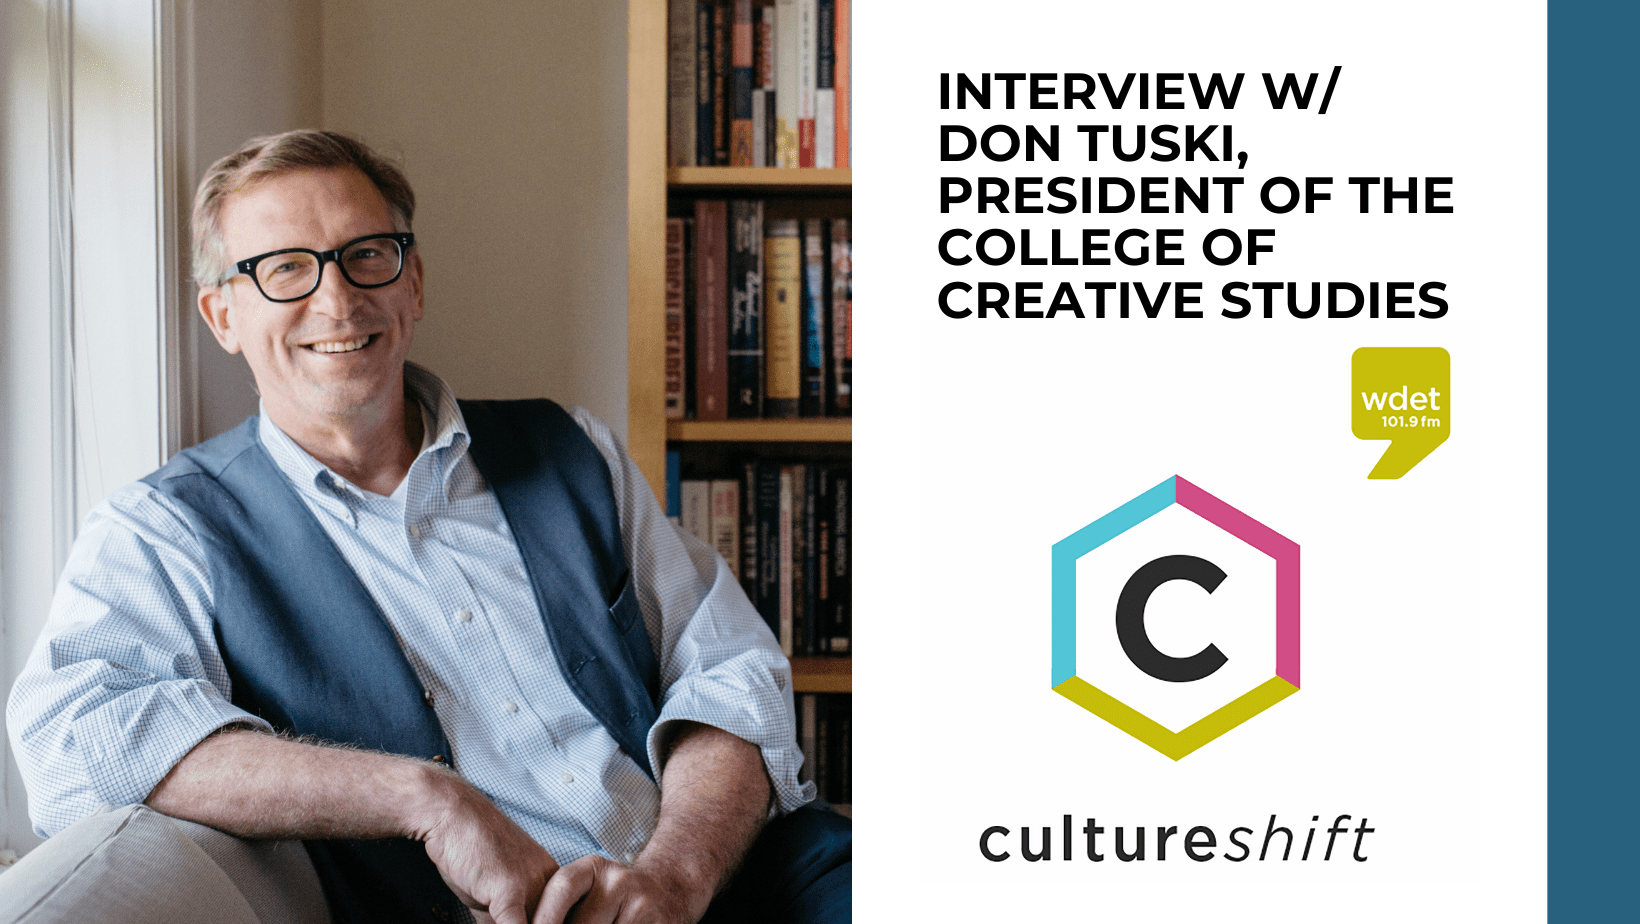 split image with Don Tuski on the left and the WDET Culture Shift show logo on the right with the text, "Interview W/ Don Tuski, President of the College for Creative Studies"